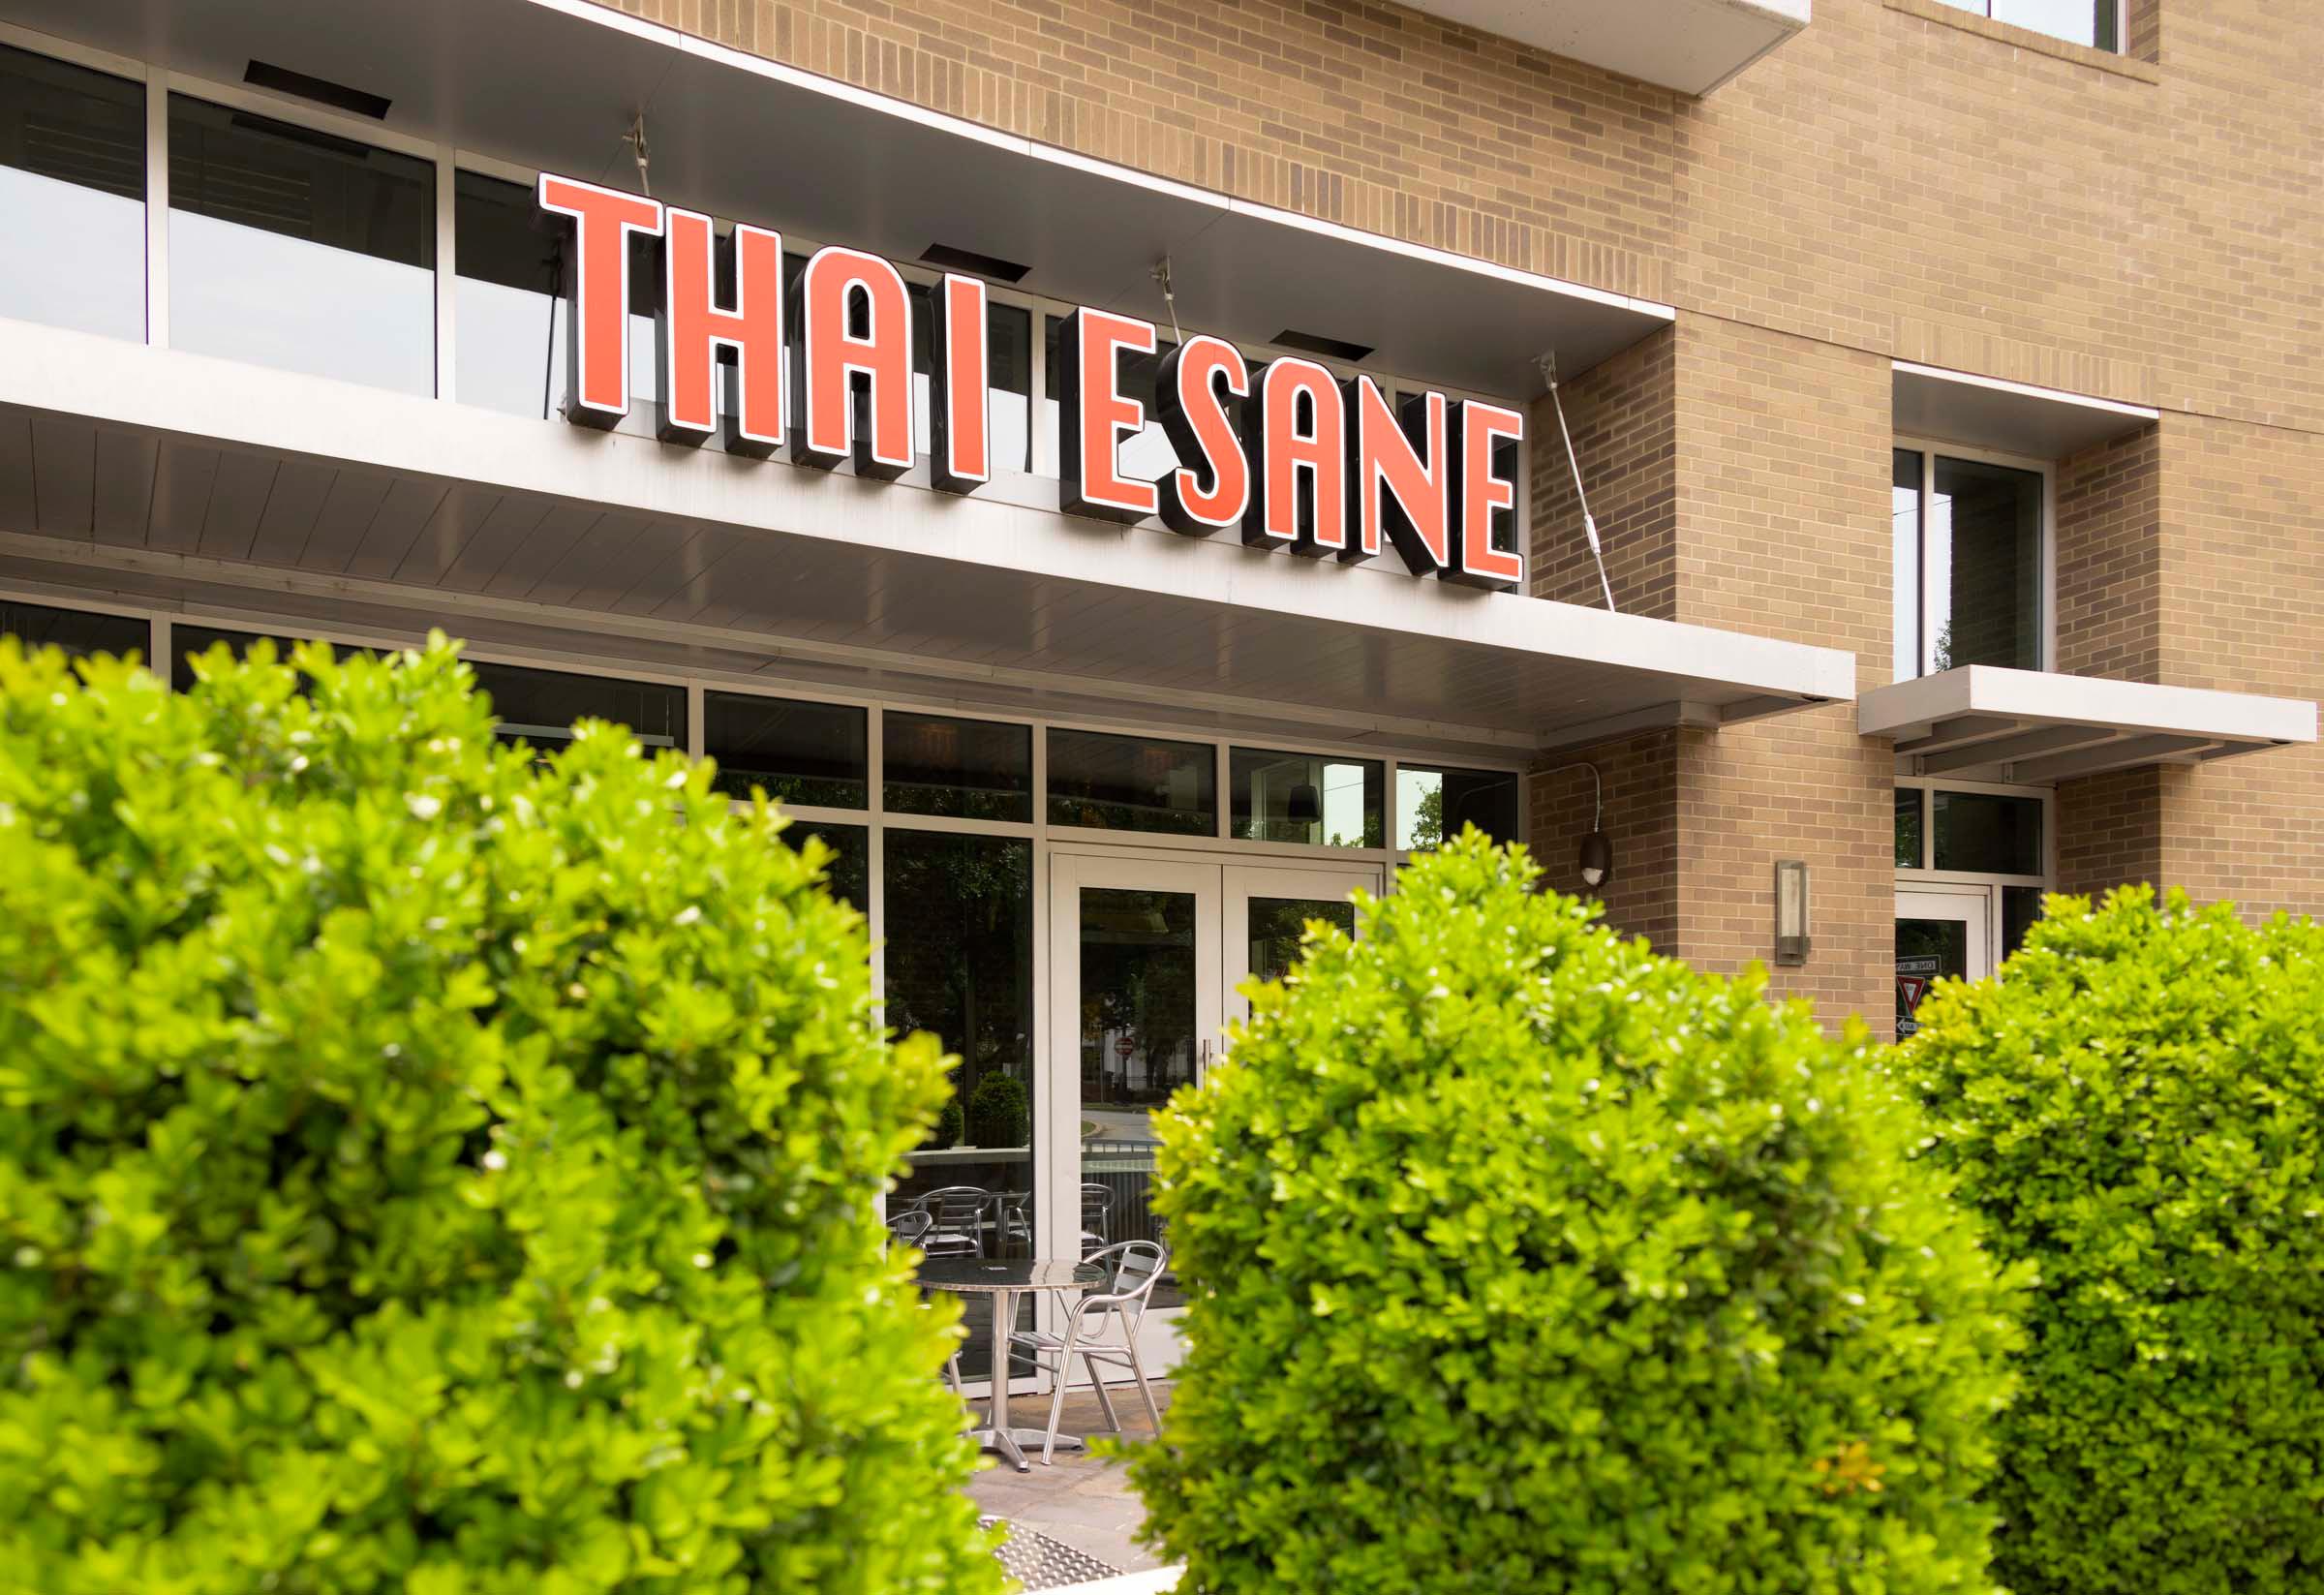 Thai Esane restaurant on the first floor of the building